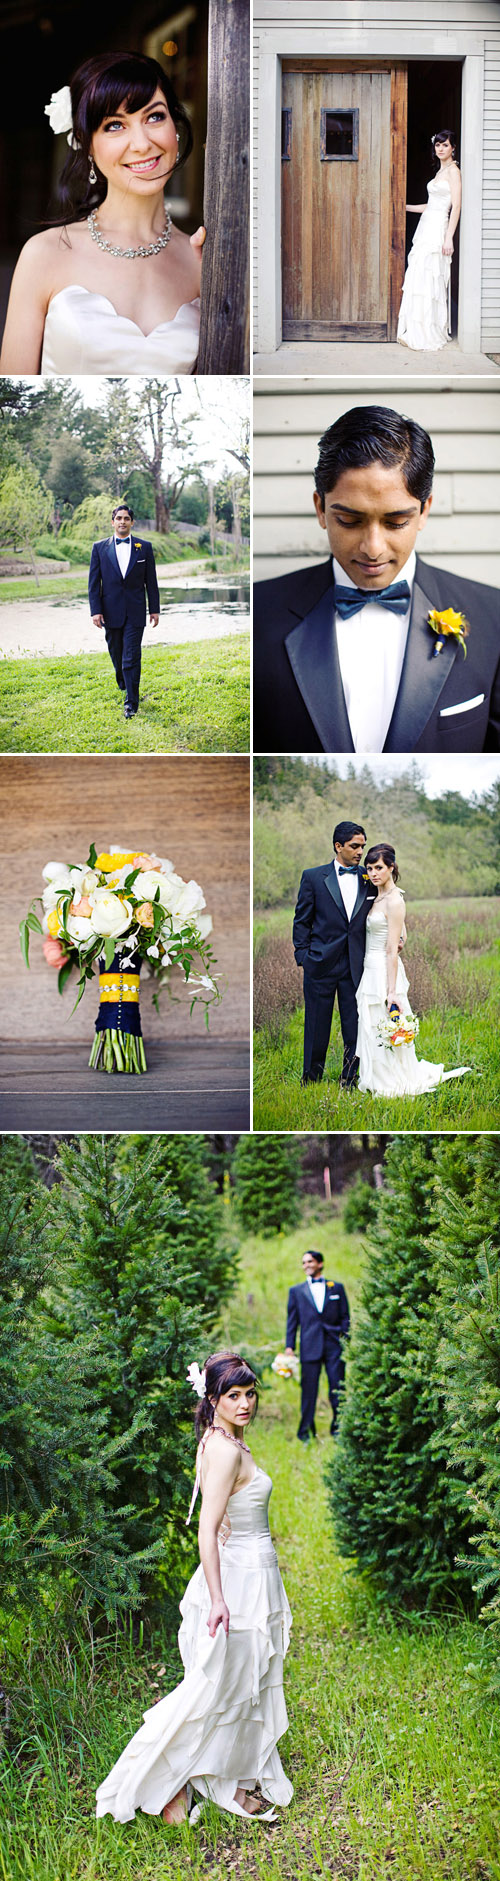 van gogh's starry night wedding fashion and design inspiration, images by meg perotti